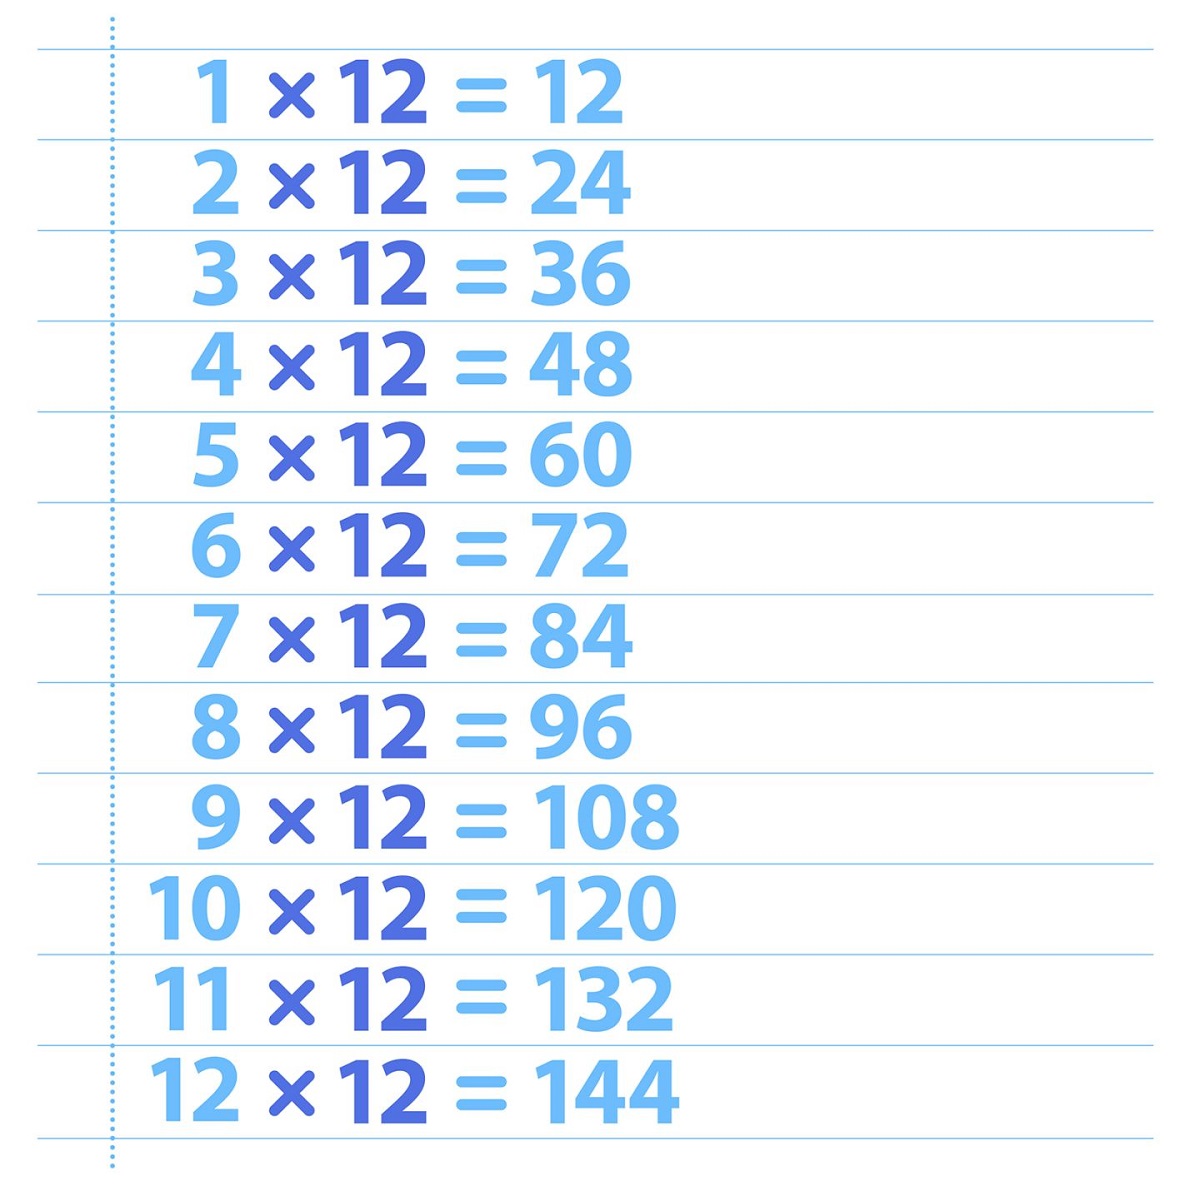 multiplications-by-12-times-table-activity-shelter